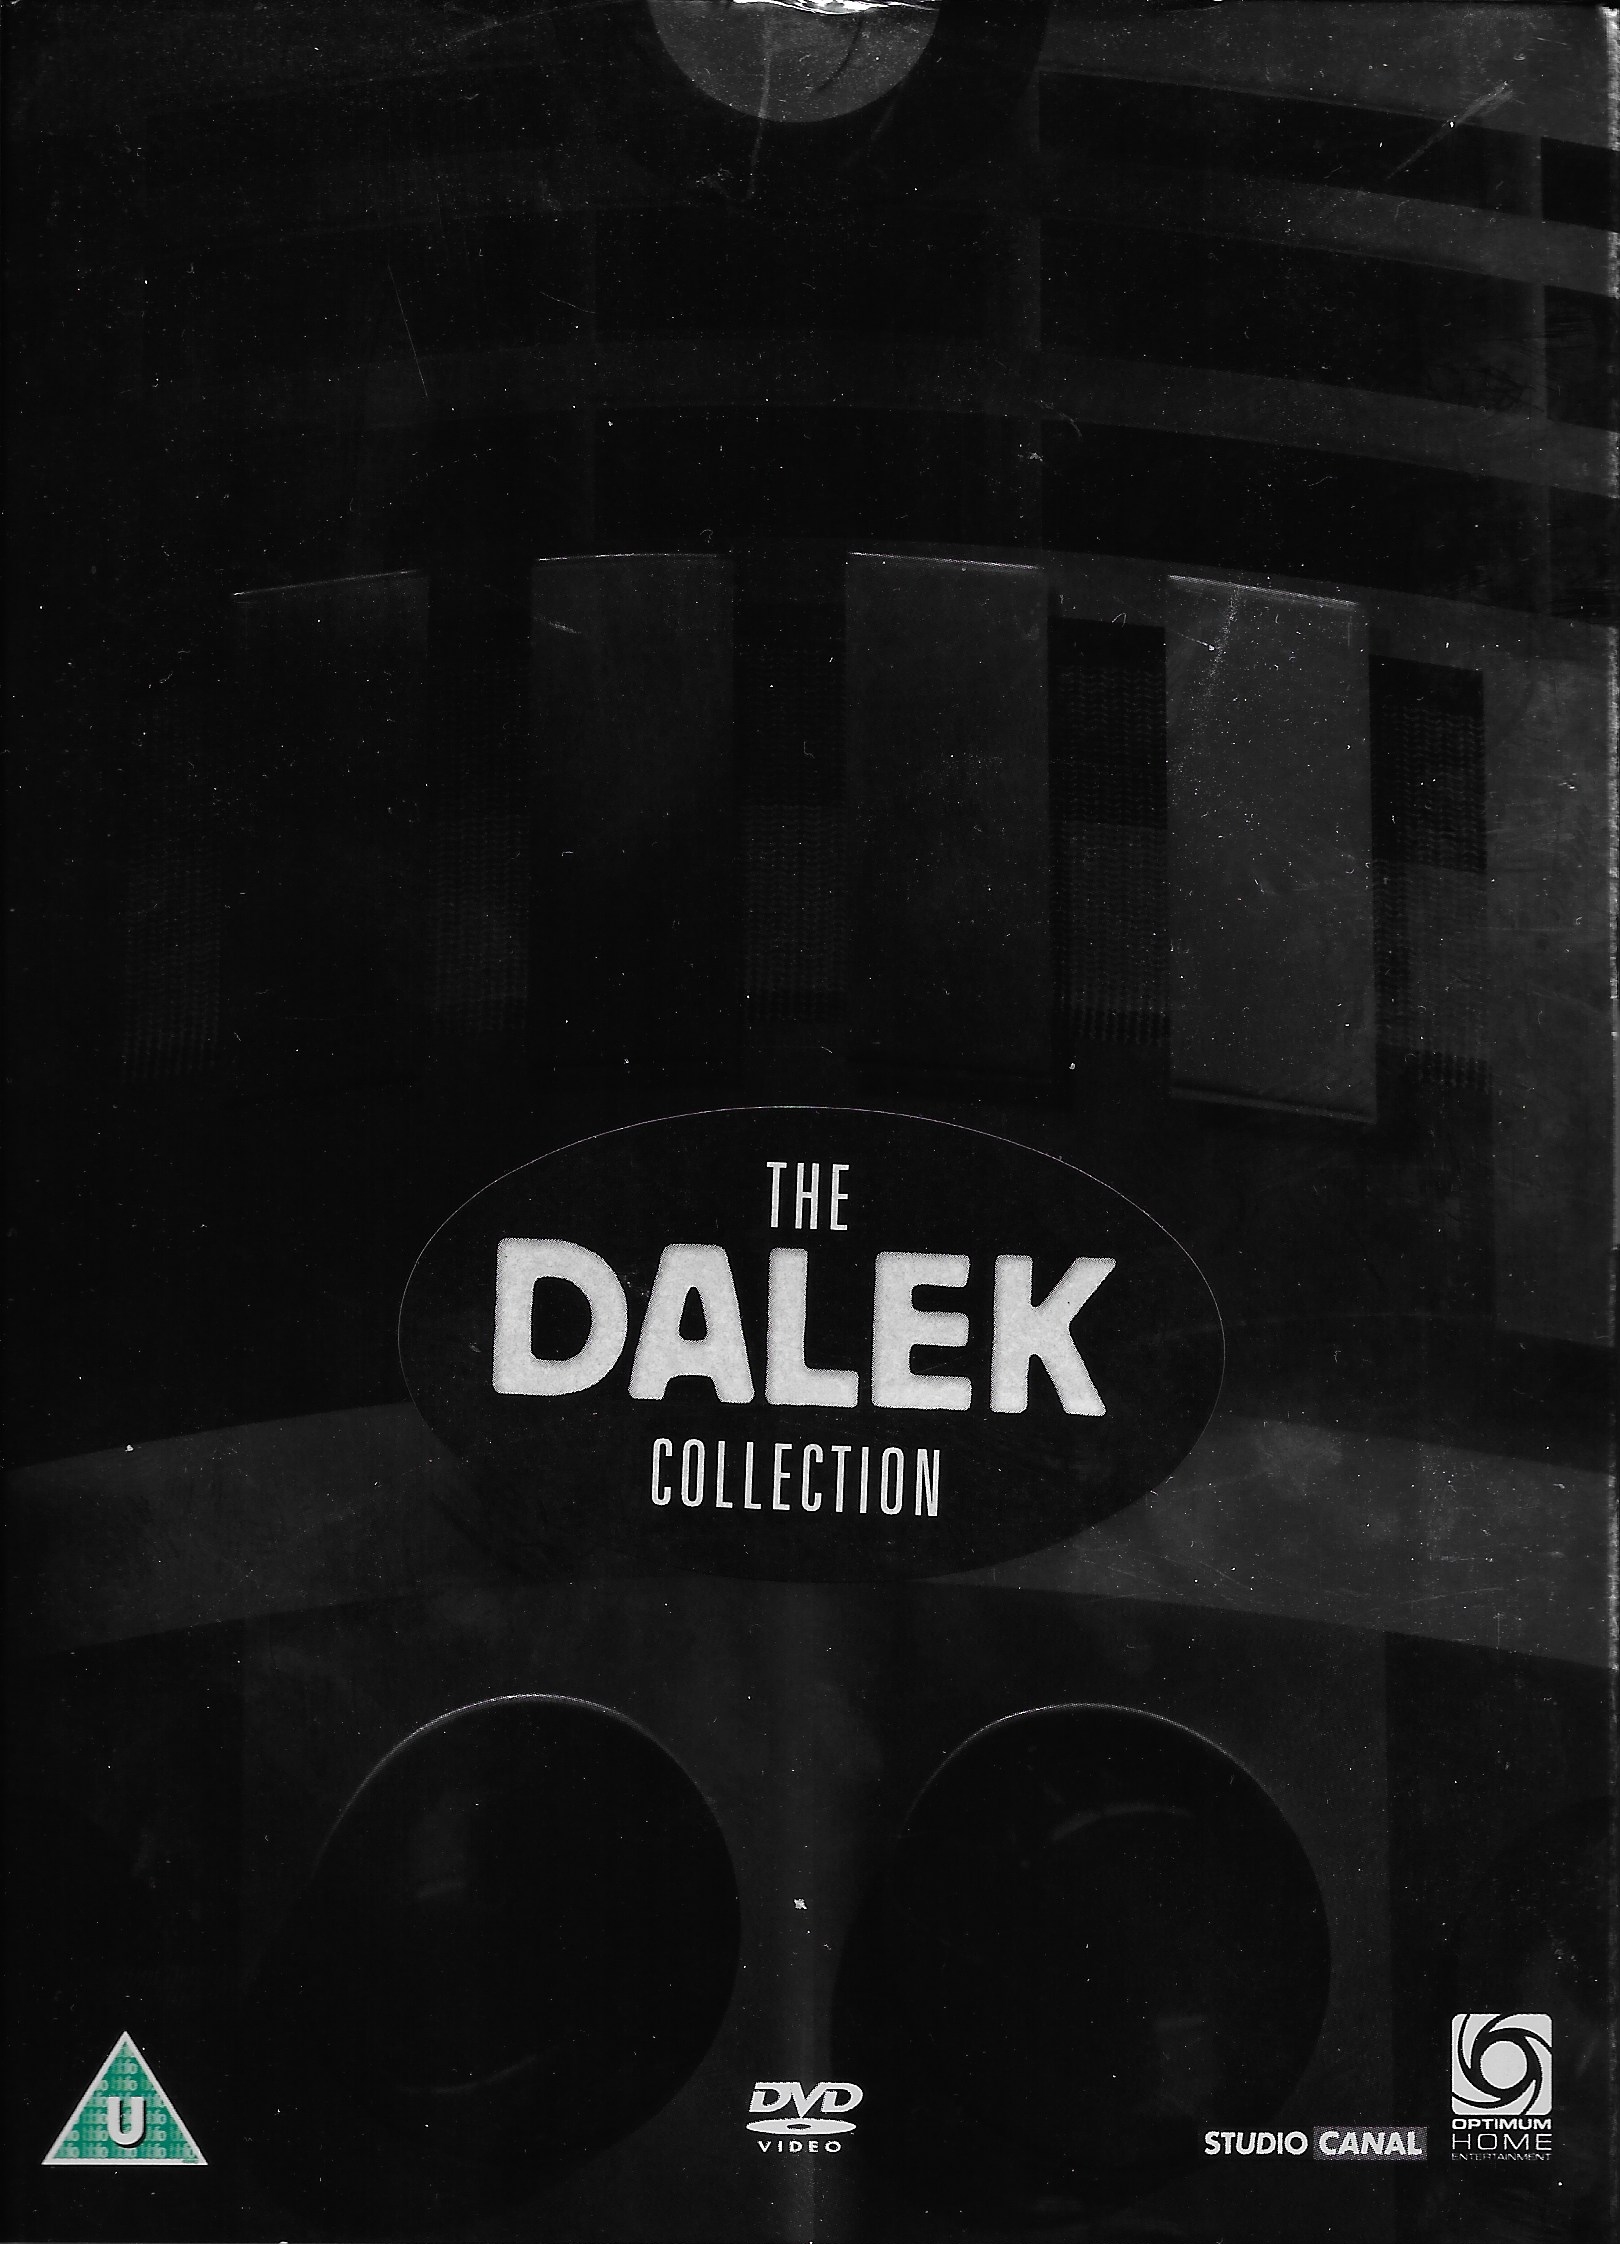 Picture of The Dalek Collection by artist Milton Subotsky from the BBC dvds - Records and Tapes library